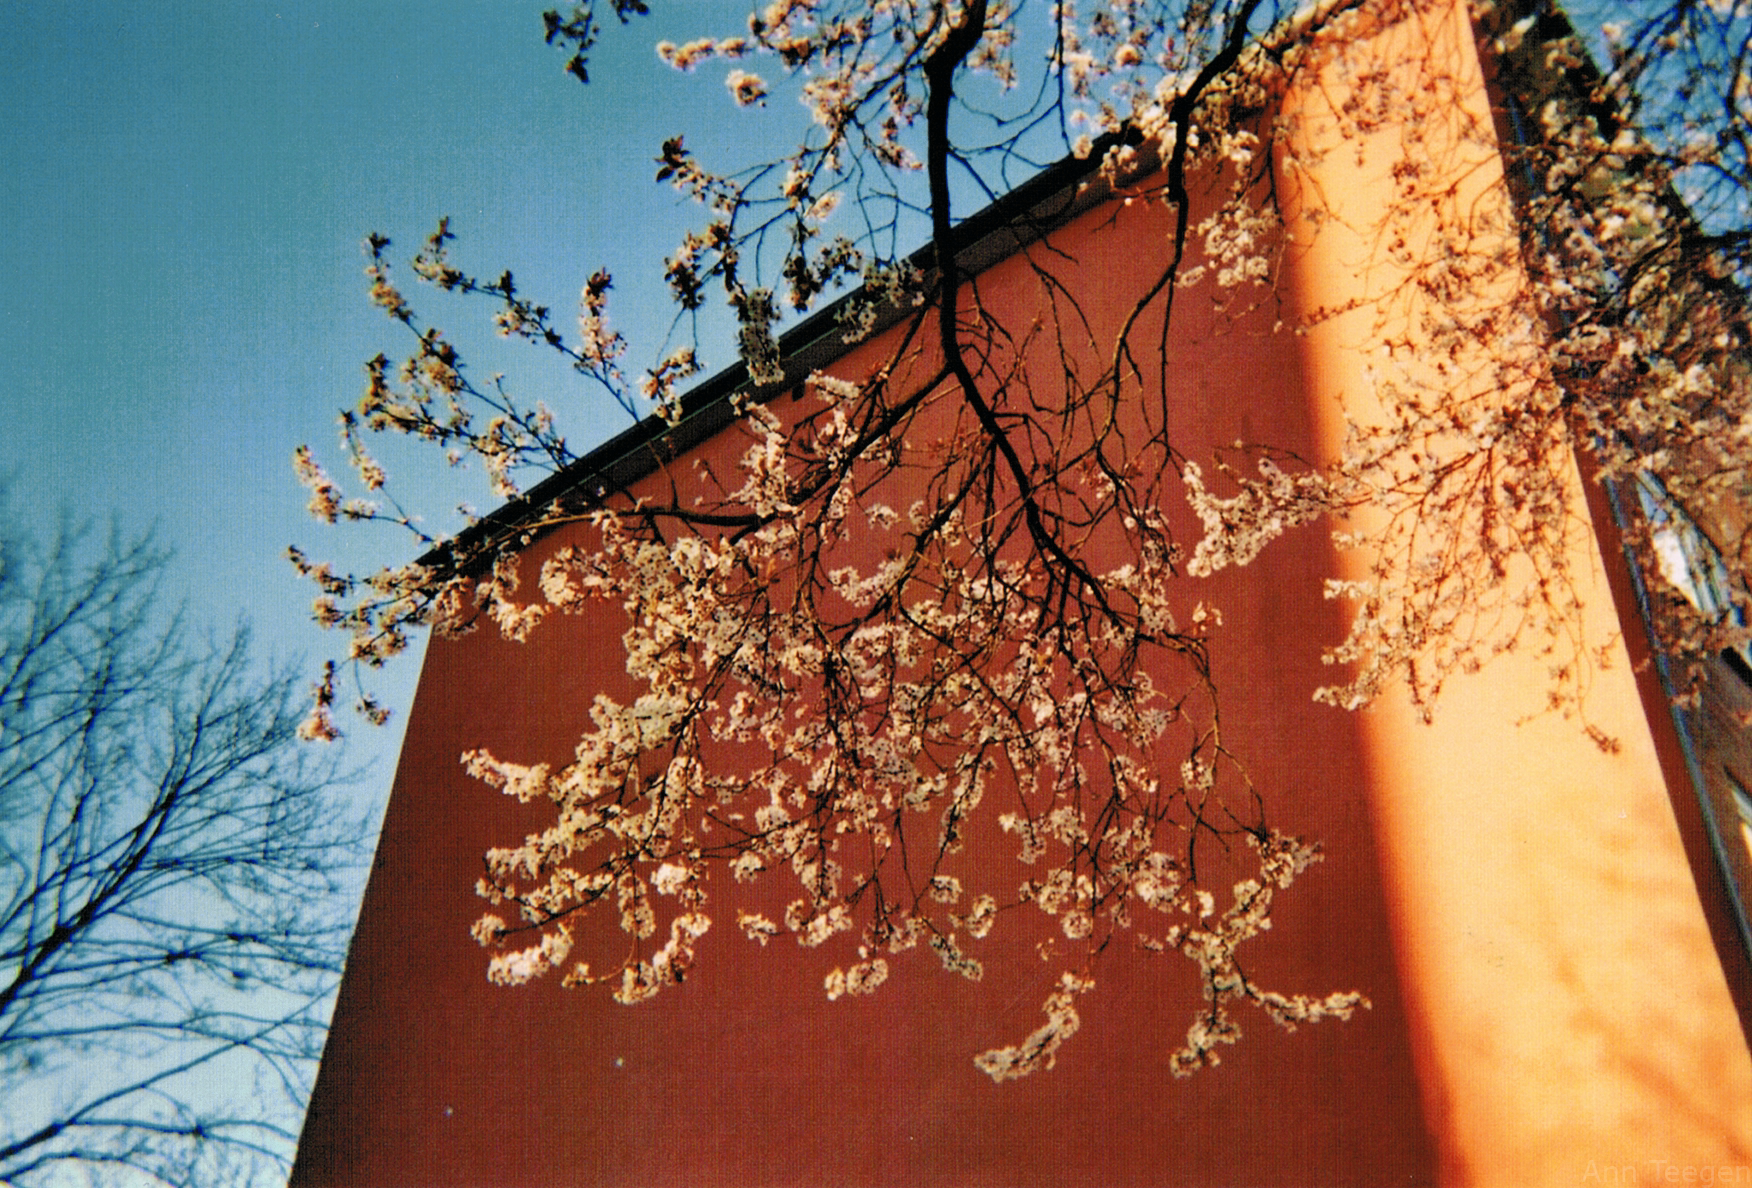 Film photo of a pale pink blooming cherry tree in front of a dark orange house